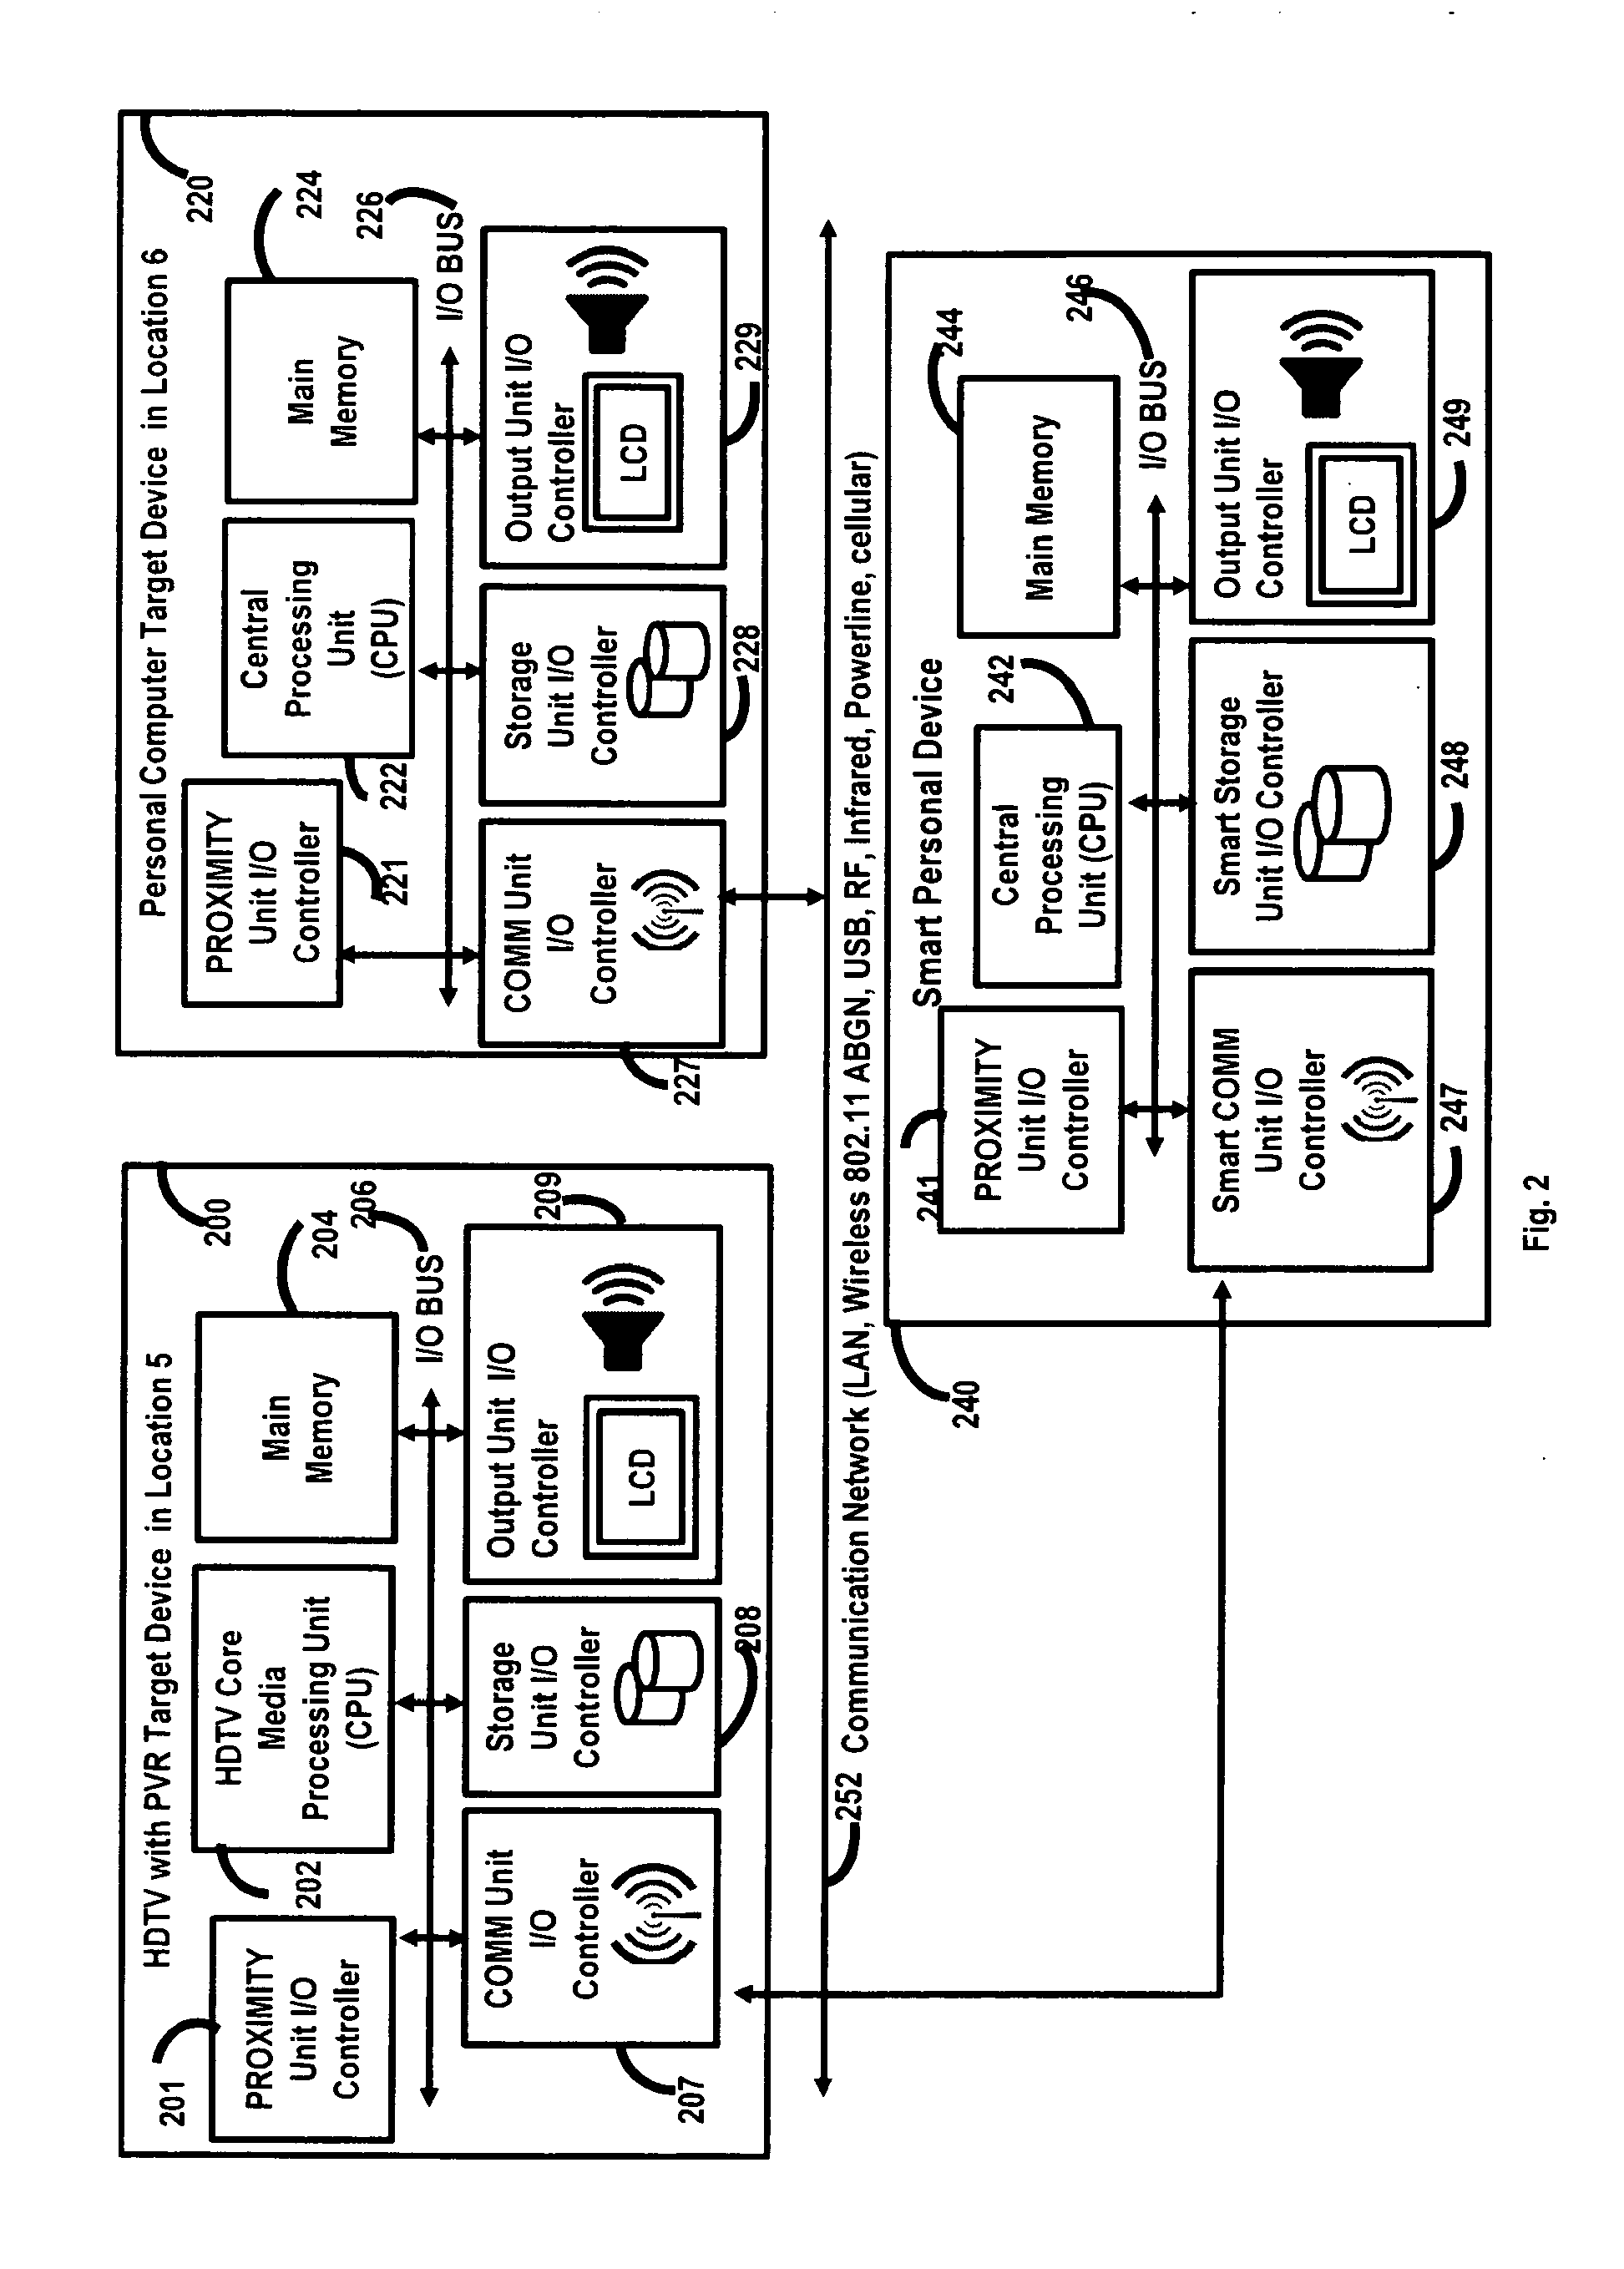 Enhanced content delivery system and method spanning multiple data processing systems